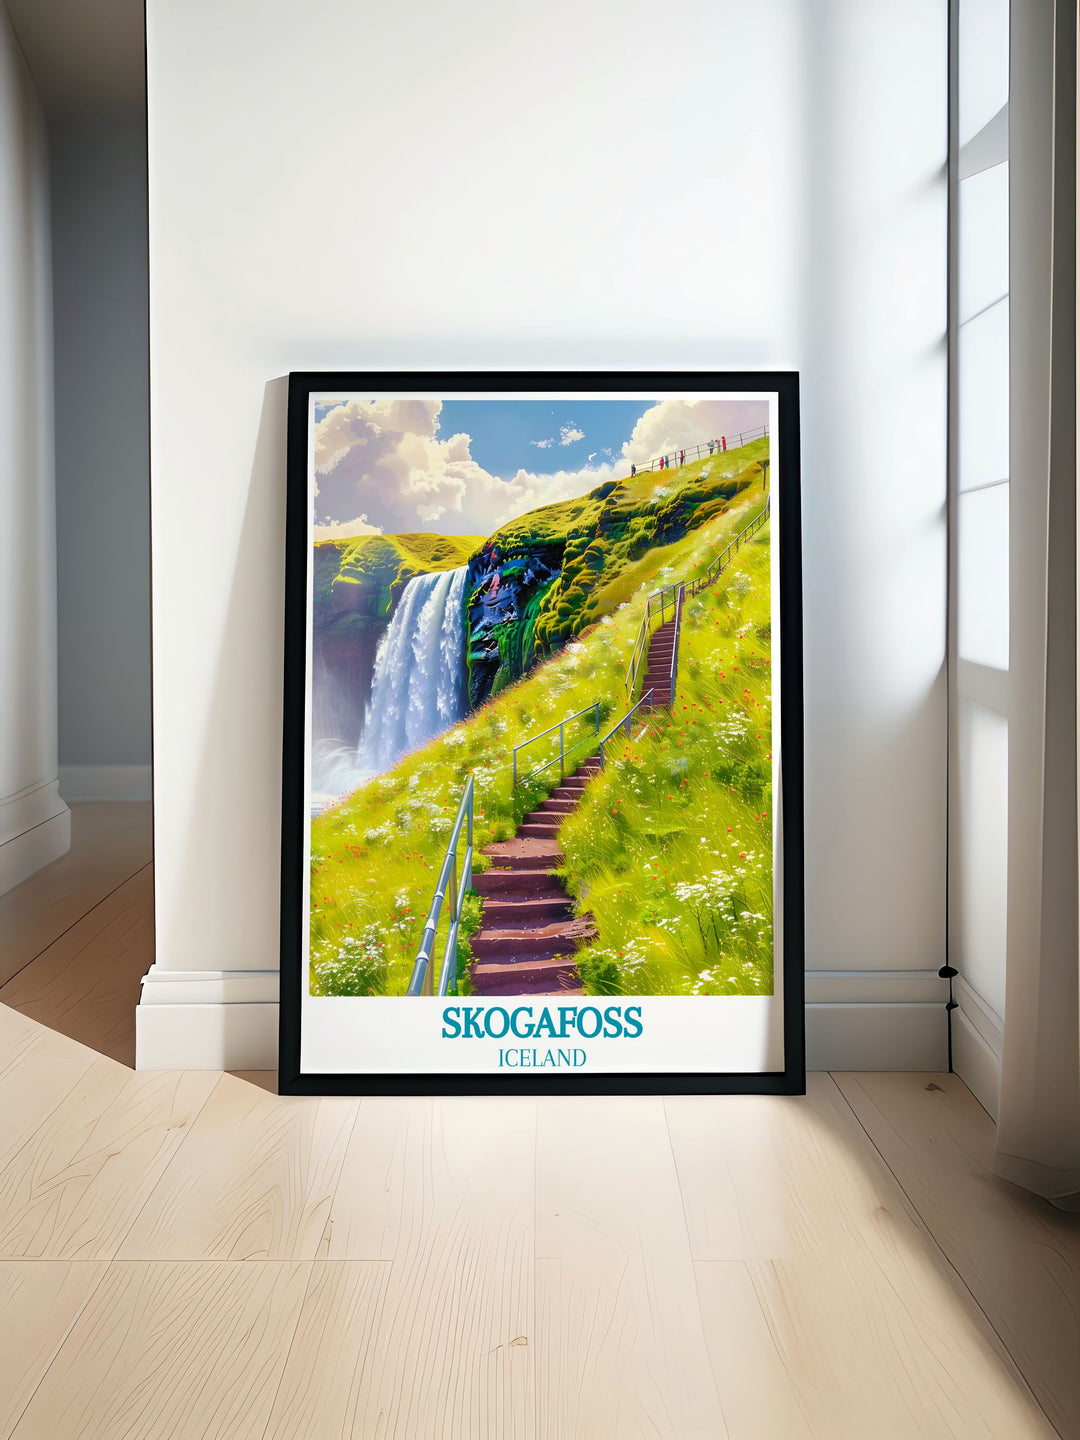 Celebrate the stunning landscapes of Iceland with this detailed art print of Skogafoss, showcasing the waterfalls impressive height and the surrounding greenery.